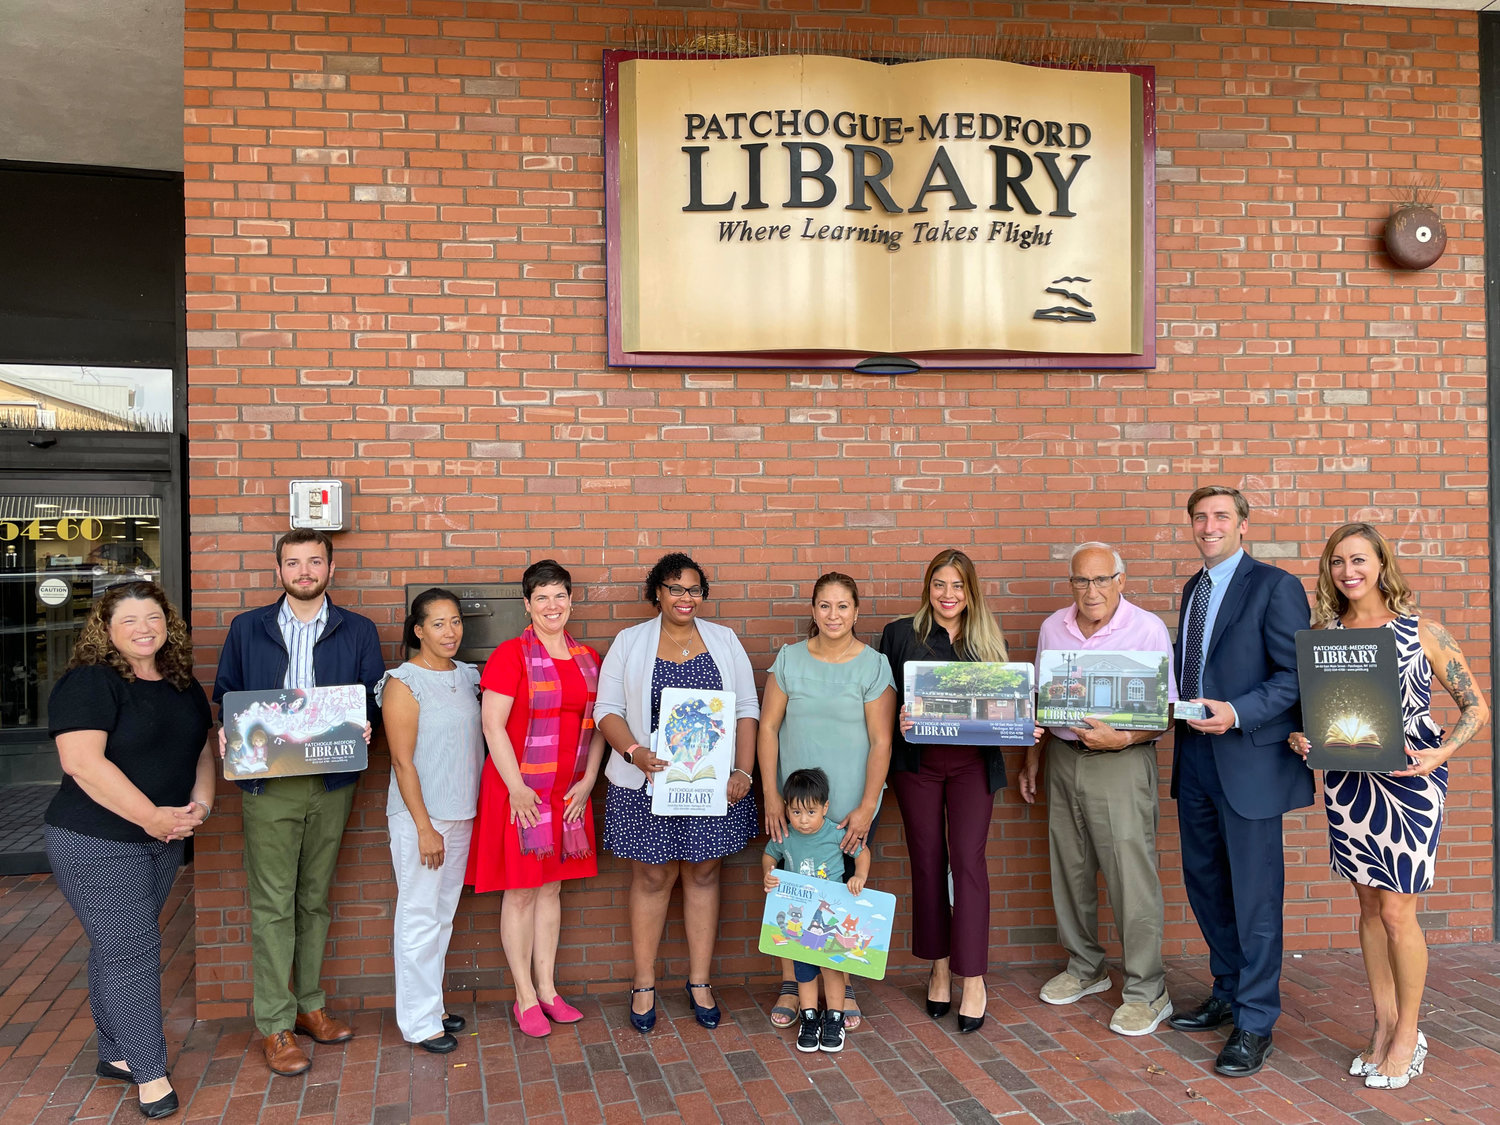 L-R: Library director Danielle Paisley, library trainee Joshua Tanski, Pat-Med Library community service worker Juana Shellman, Pat-Med Library assistant director Jennifer Bollerman, head of community access to resources and education Lissetty Thomas, community member Lurdes Balbuca and her son Jaziel Hernandez, 2, Patchogue Village trustee Lizbeth Carrillo, Patchogue mayor Paul Pontieri, community advocate Ryan McGarry, head of public services Michele Cayea.